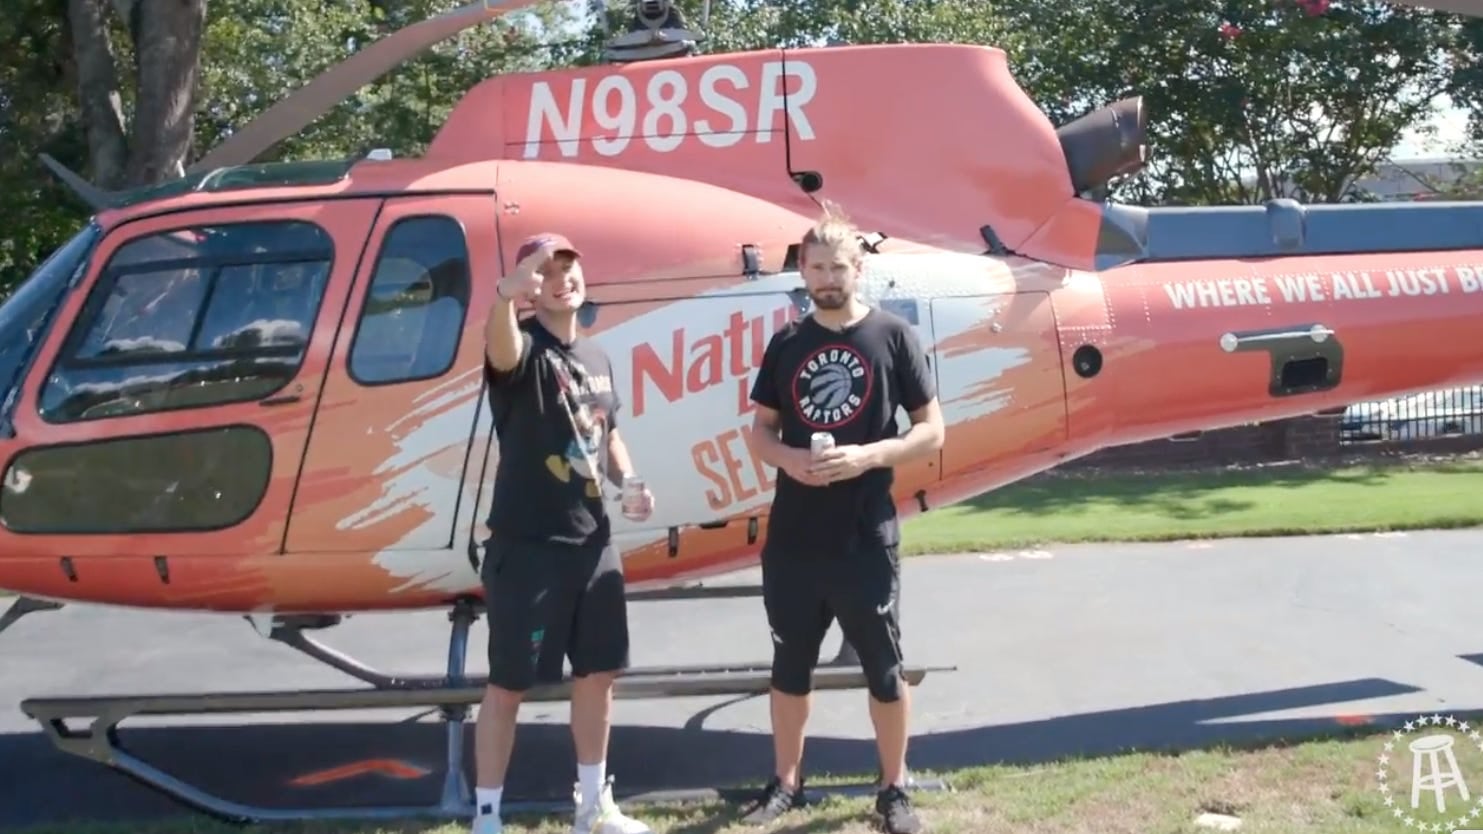 The Natty Tour Is Back: We Drank Natty Seltzers On A Helicopter At Clemson's Home Opener